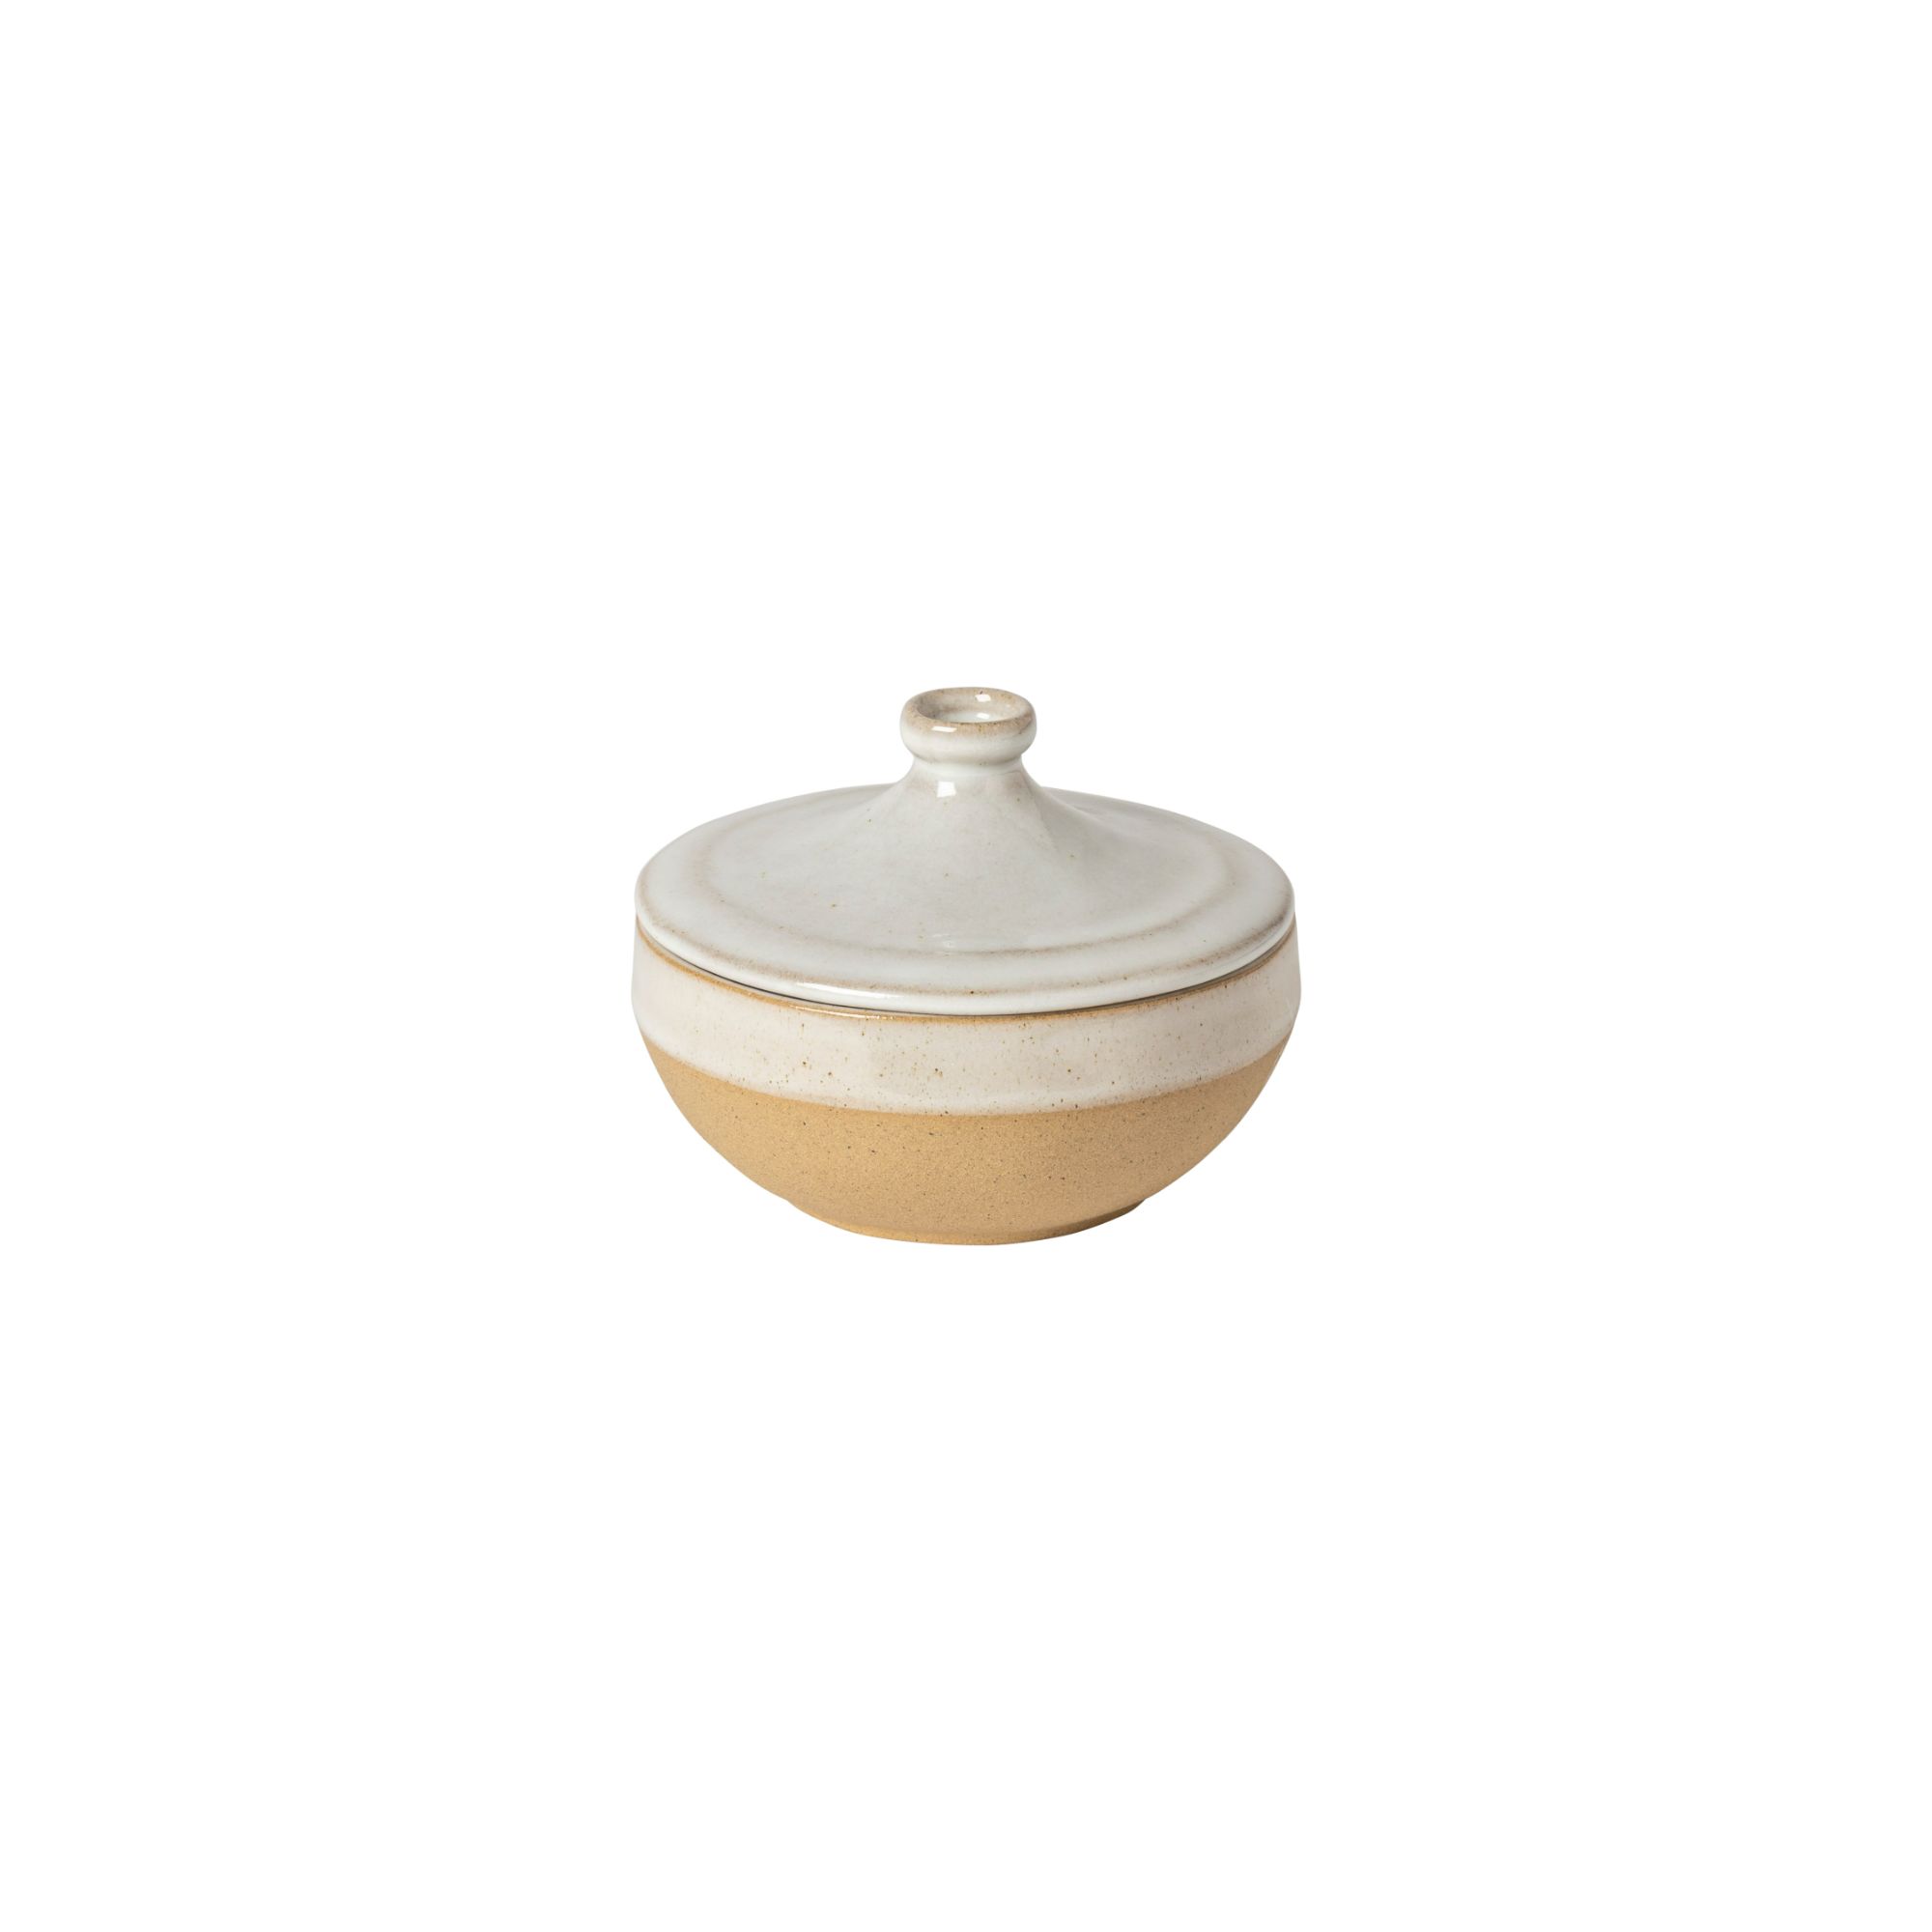 Marrakesh Sable Blanc Covered Casserole 12cm Gift